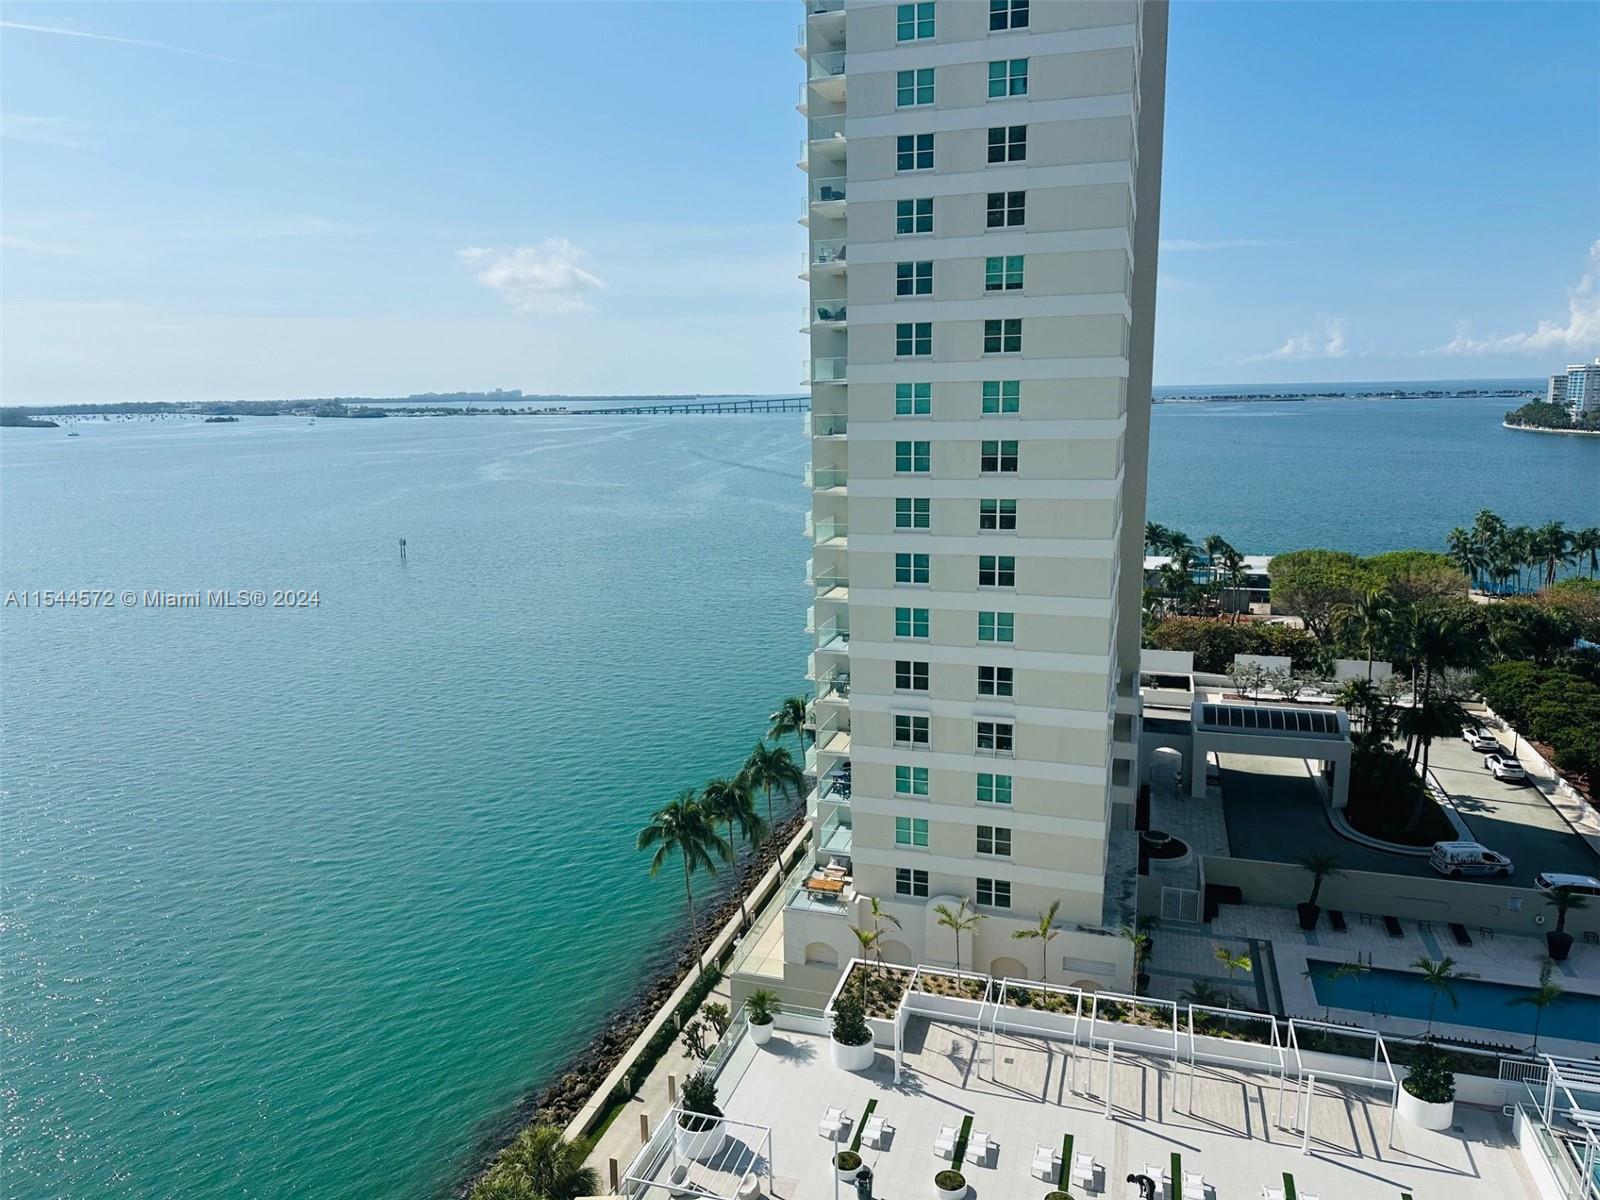 AMAZING UNIT AT ISOLA BRICKELL KEY! GORGEOUS VIEWS OF THE BAY AND OCEAN FROM THIS CORNER UNIT, 2 BEDROOMS AND 2 BATHROOMS, SPLIT PLAN UNIT. NICELY UPDATED WITH GORGEOUS TILE FLOOR, KITCHEN WITH THE OPEN SPACE TO THE LIVING AREA. VERY BRIGHT BEDROOMS WITH OCEAN VIEW FROM EACH BEDROOM. UNIT COMES WITH ONE CAR GARAGE ASSIGNED. CONDO ASSOCIATION IS IN THE PROCESS OF MAJOR RENOVATION, A BEAUTIFUL NEW OLIMPIC POOL THAT IS EXPECTED TO BE OPEN FIRST QUARTER OF 2024. A NEW GYM WITH GORGEOUS OCEAN VIEWS, A NEW TENNIS COURT. SECURE CONCIERGE WITH A BRIGHT SPACIOUS LOBBY. WALKING DISTANCE TO RESTAURANTS AND BRICKEL LIFETIME!